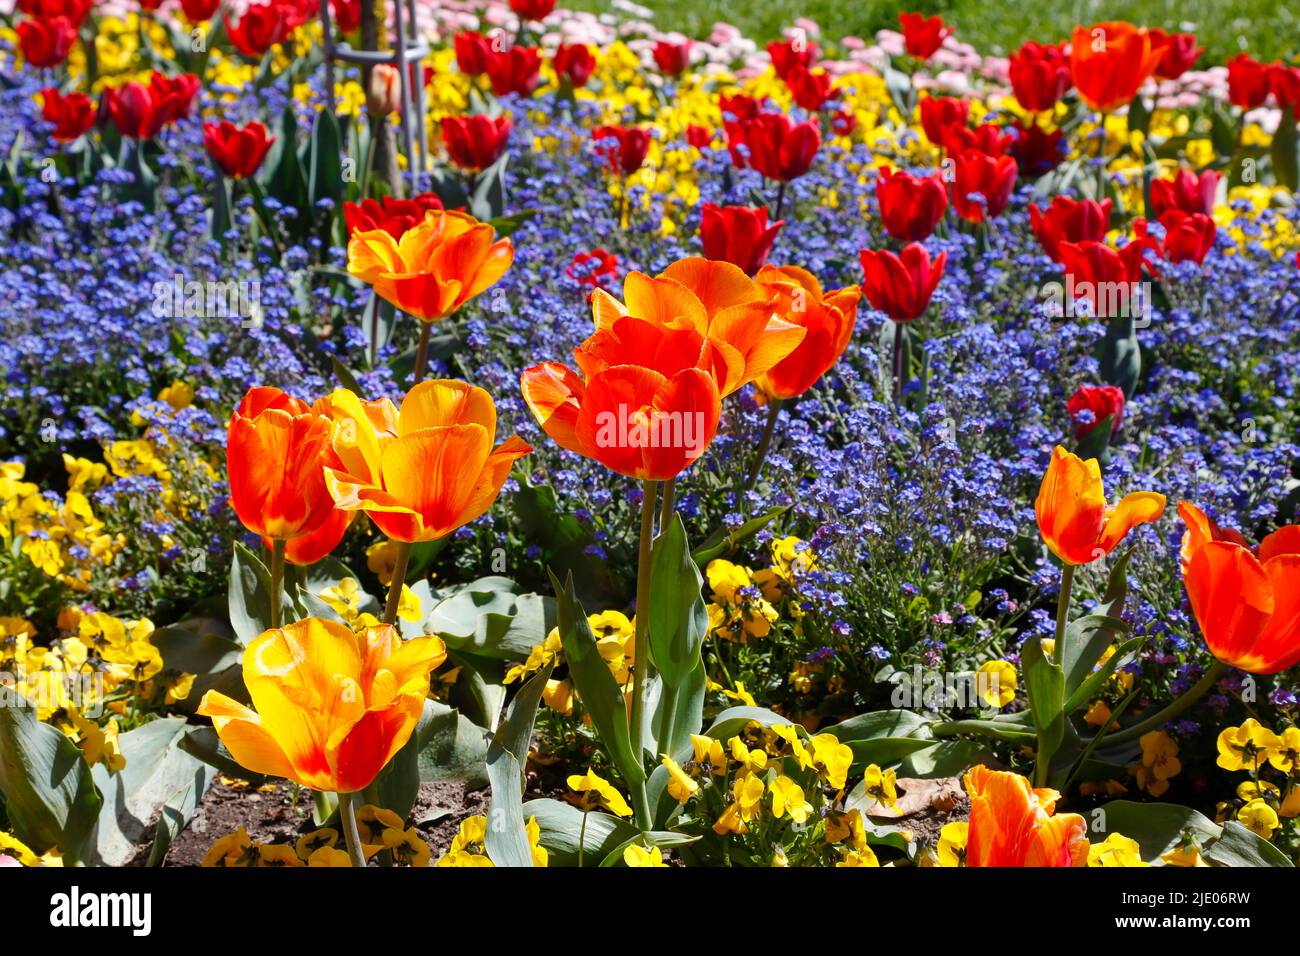 Tulips (Tulipa) in the Ulm Rose Garden, pansies, viola (plant) (Viola), garden, flower beds, park, yellow, orange and red flowers, flowers, spring Stock Photo